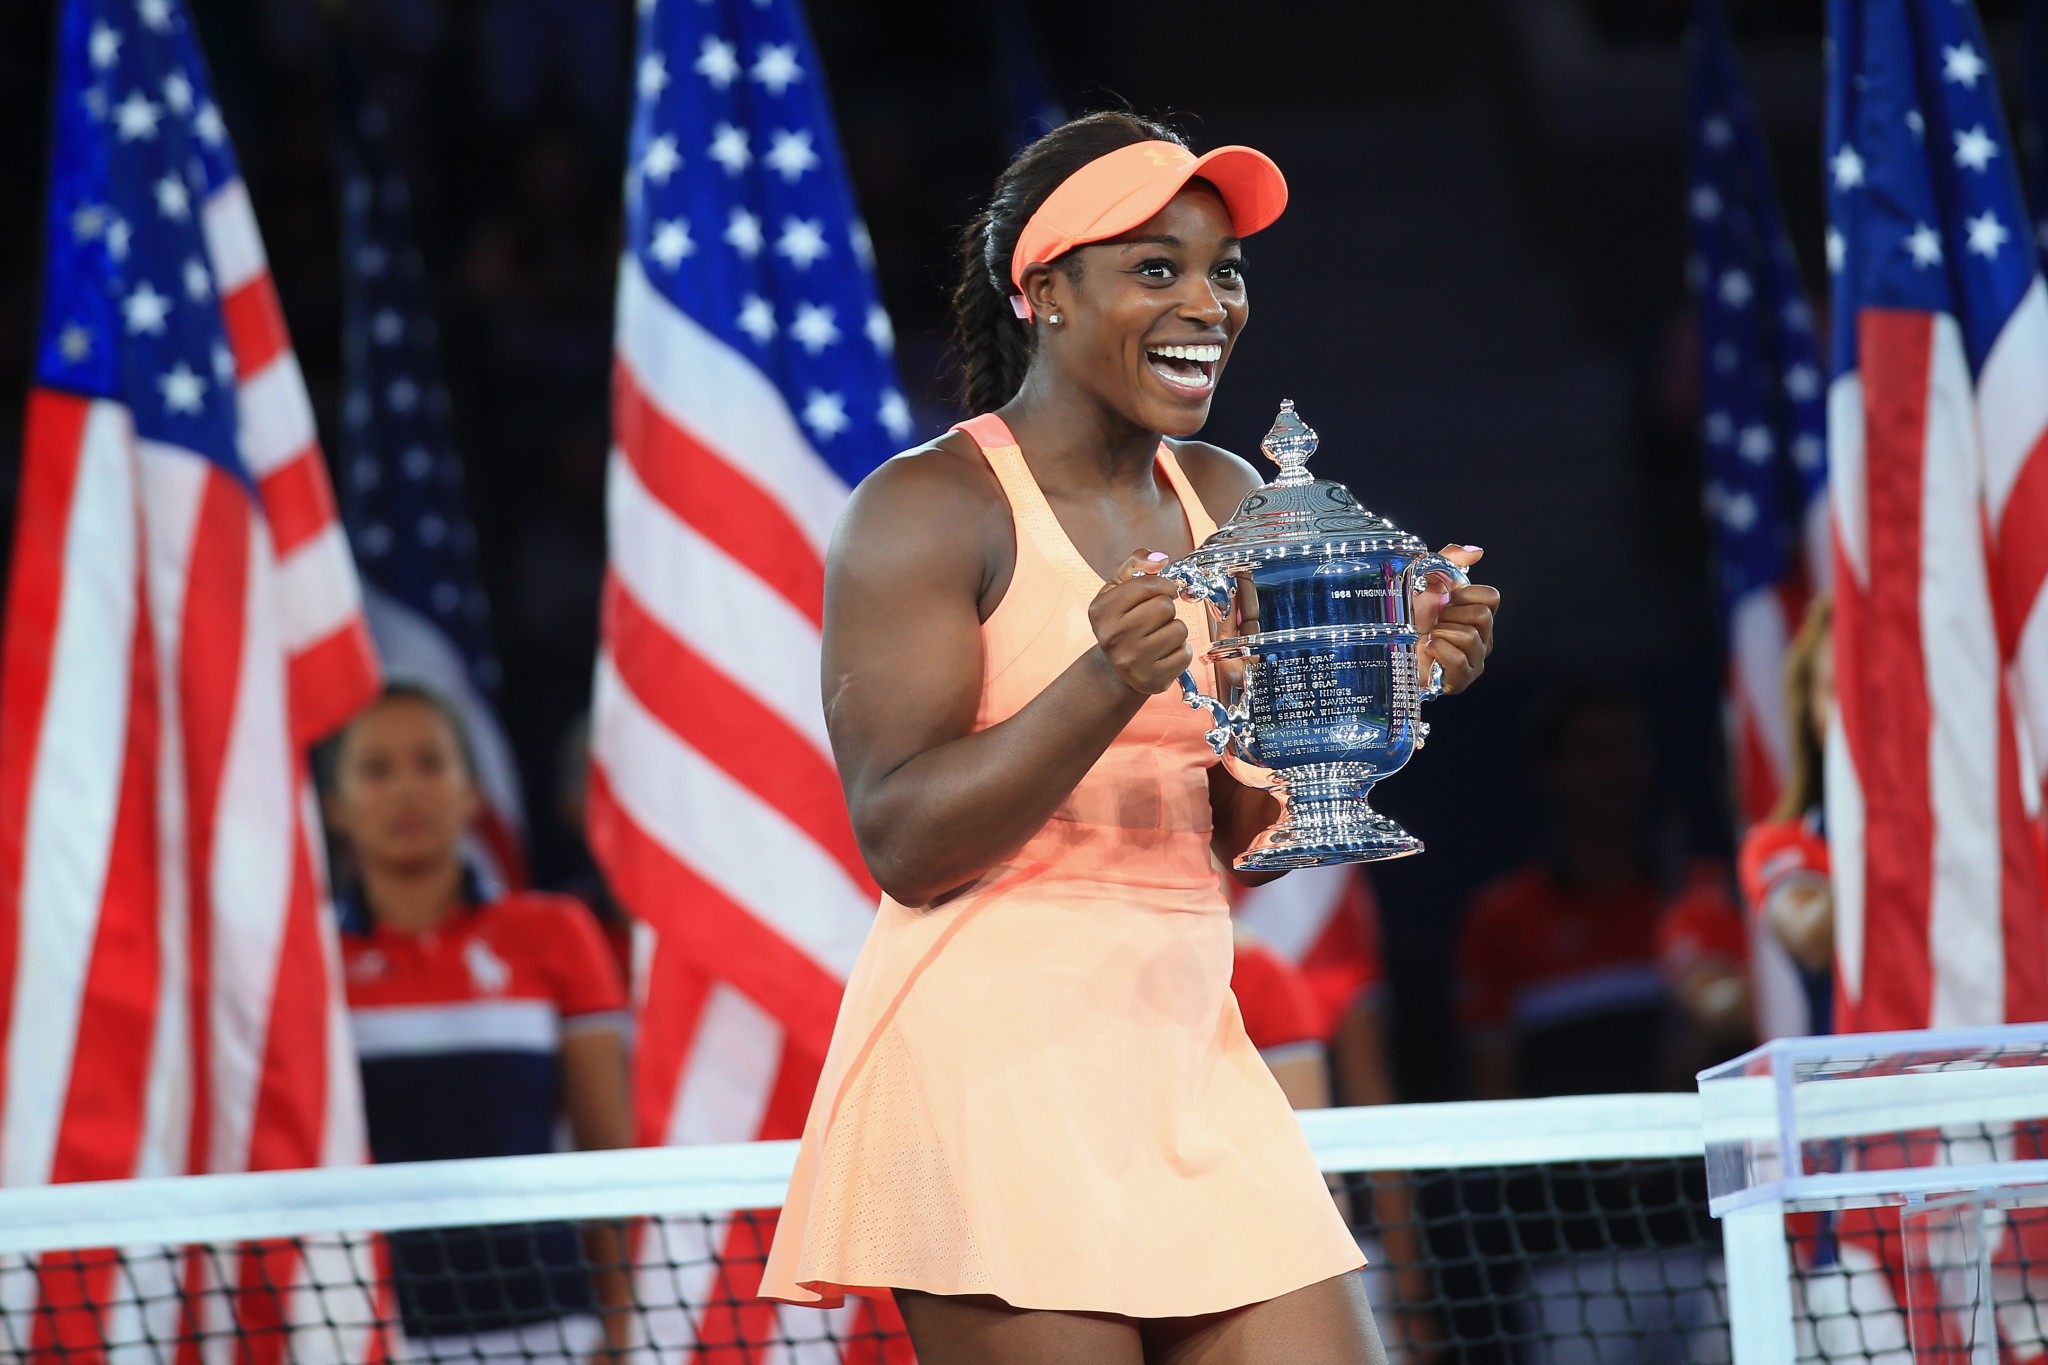 Sloane Stephens has won the women's singles US Open title ©Getty Images